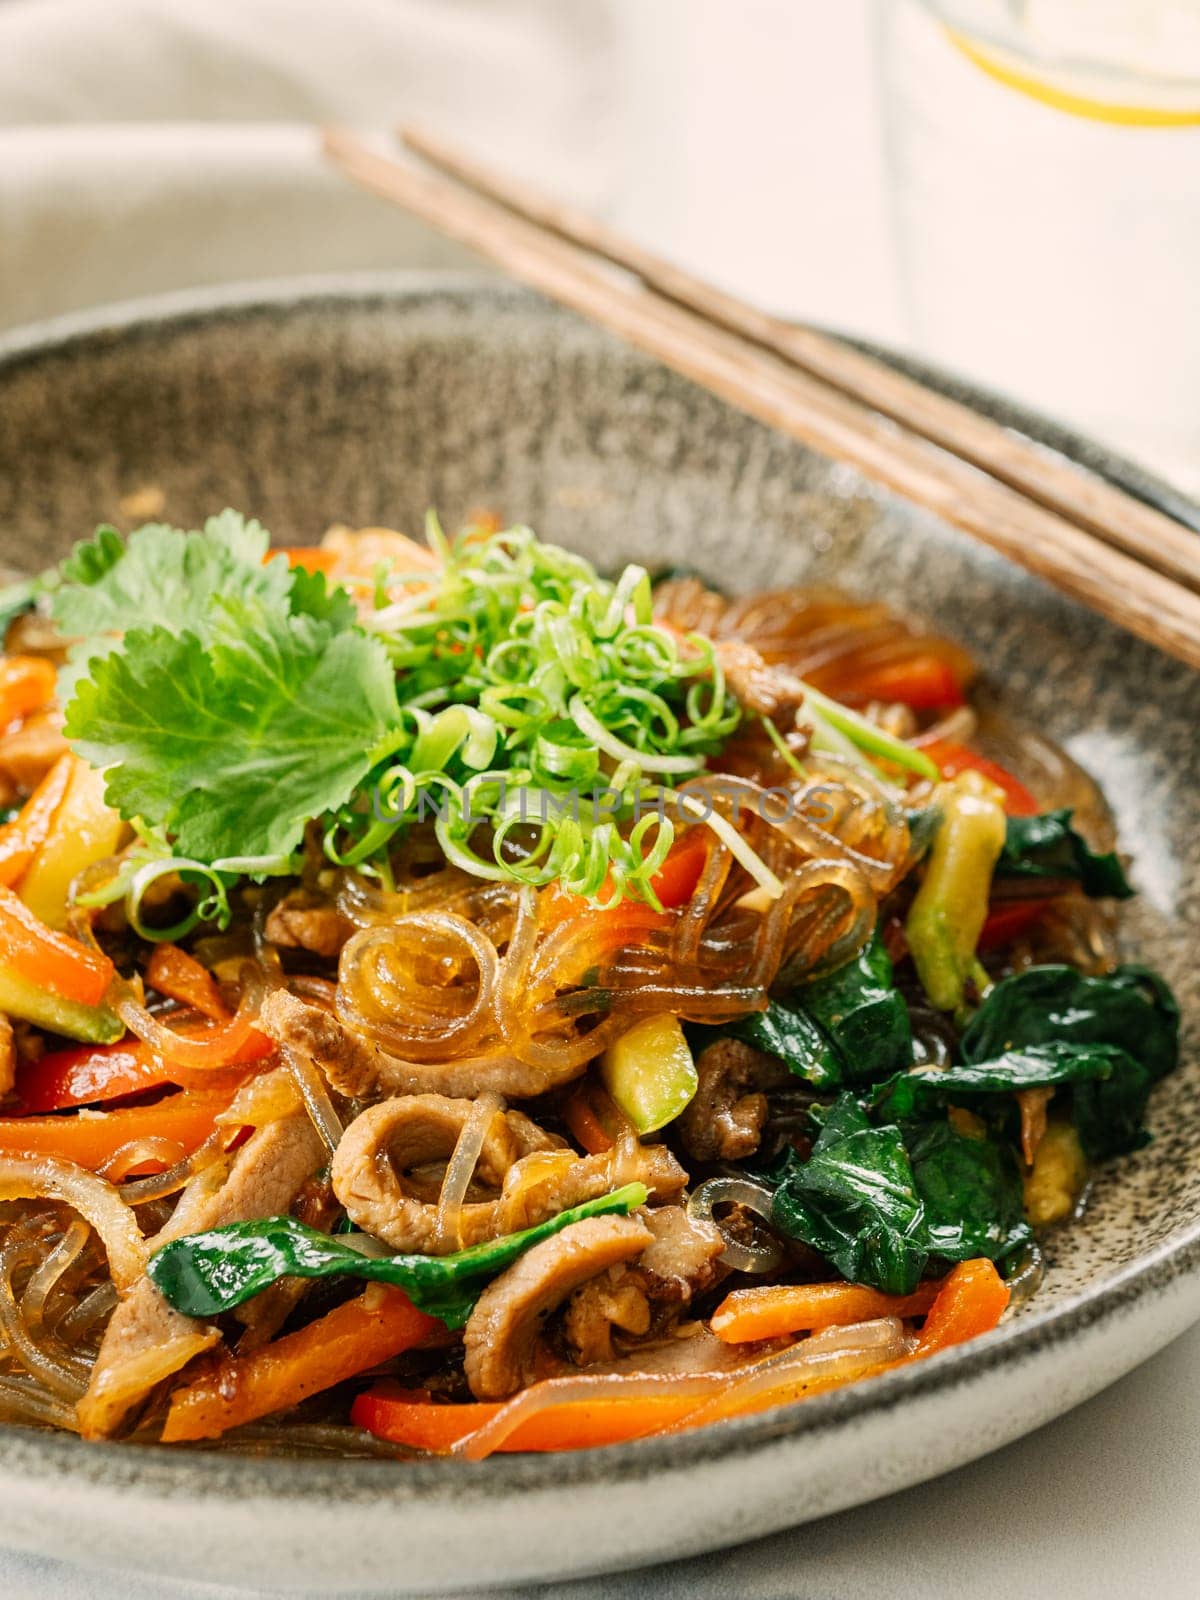 Asian noodles with meat and vegetables. Stir fry noodles with vegetables and beef, pork or chicken. Plate of asian buckwheat soba noodles with vegetables and chicken.